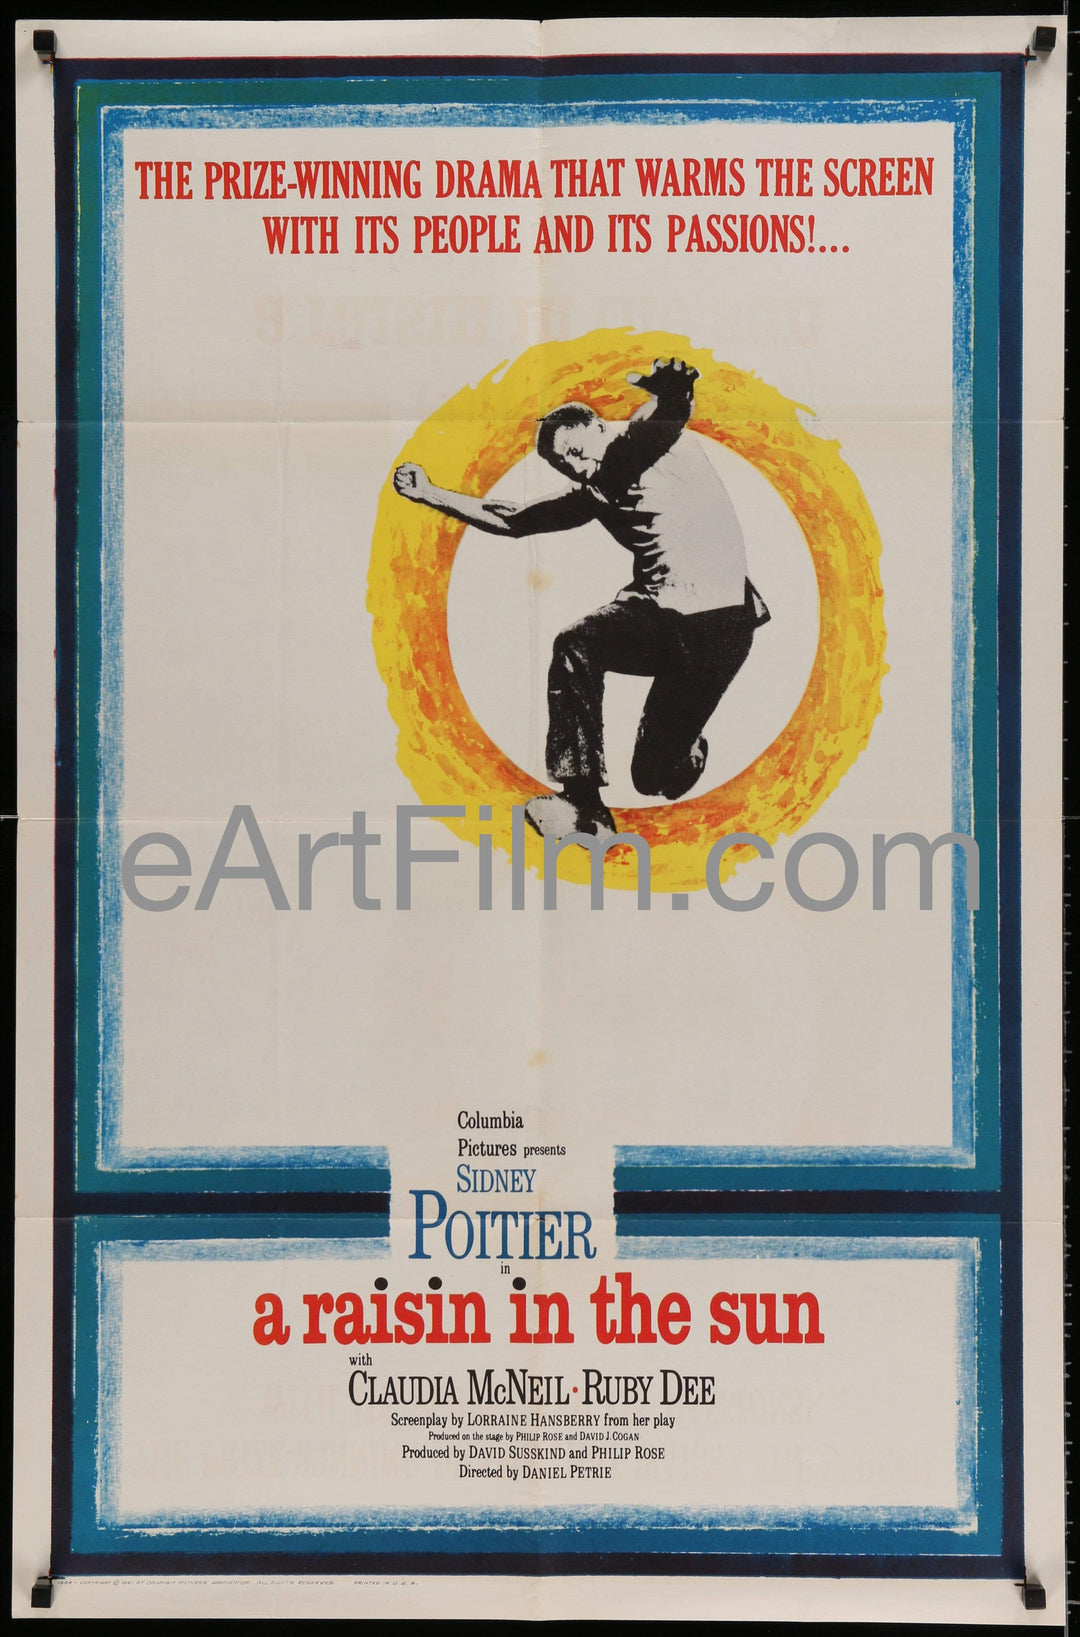 A Raisin In The Sun-Sidney Poitier-Ruby Dee-Louis Gossett-1961-27x41 _related_bob-balaban, _related_buck-henry, _related_eartfilm-merchandise-collections, _related_joan-crawford, ANT, Lorraine Hansberry, Louis Gossett, Ruby Dee, Sidney Poitier, sons and daughters 